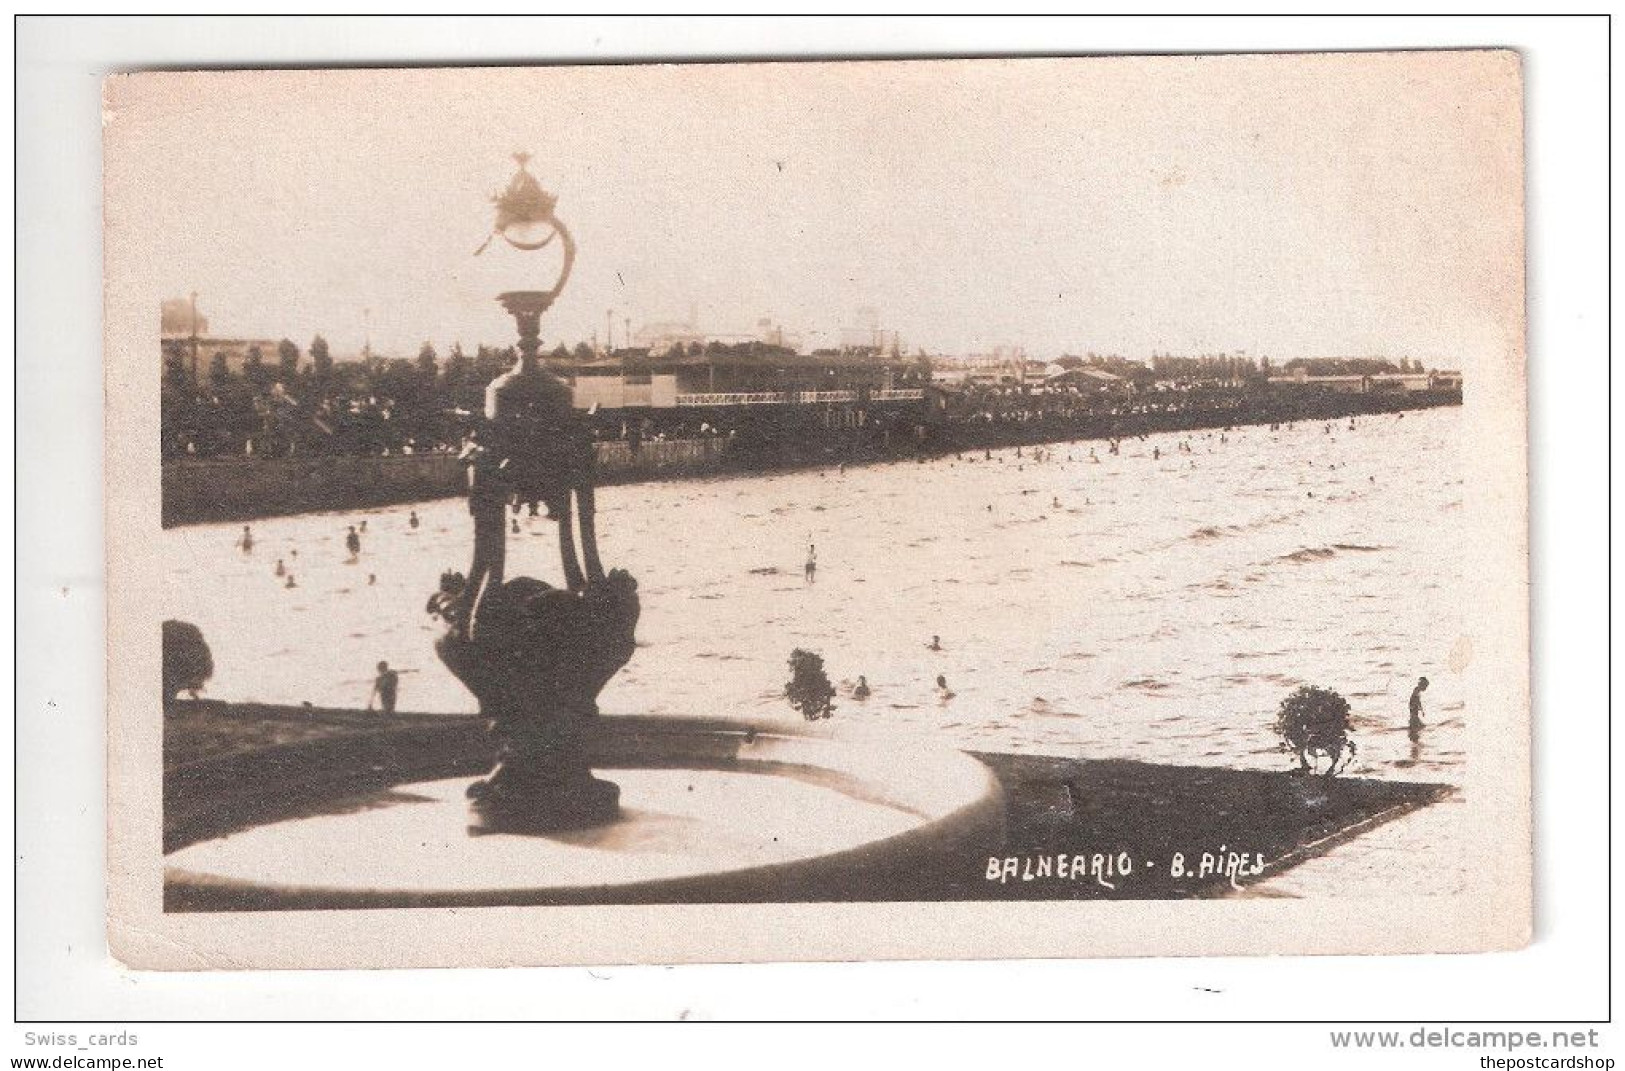 ARGENTINE - ARGENTINA - Buenos Aires BALNEARIO USED LIDO SWIMMING POOL  I CLYDE ROAD  WEST DIDSBURY  MANCHESTER  3/7/192 - Argentina